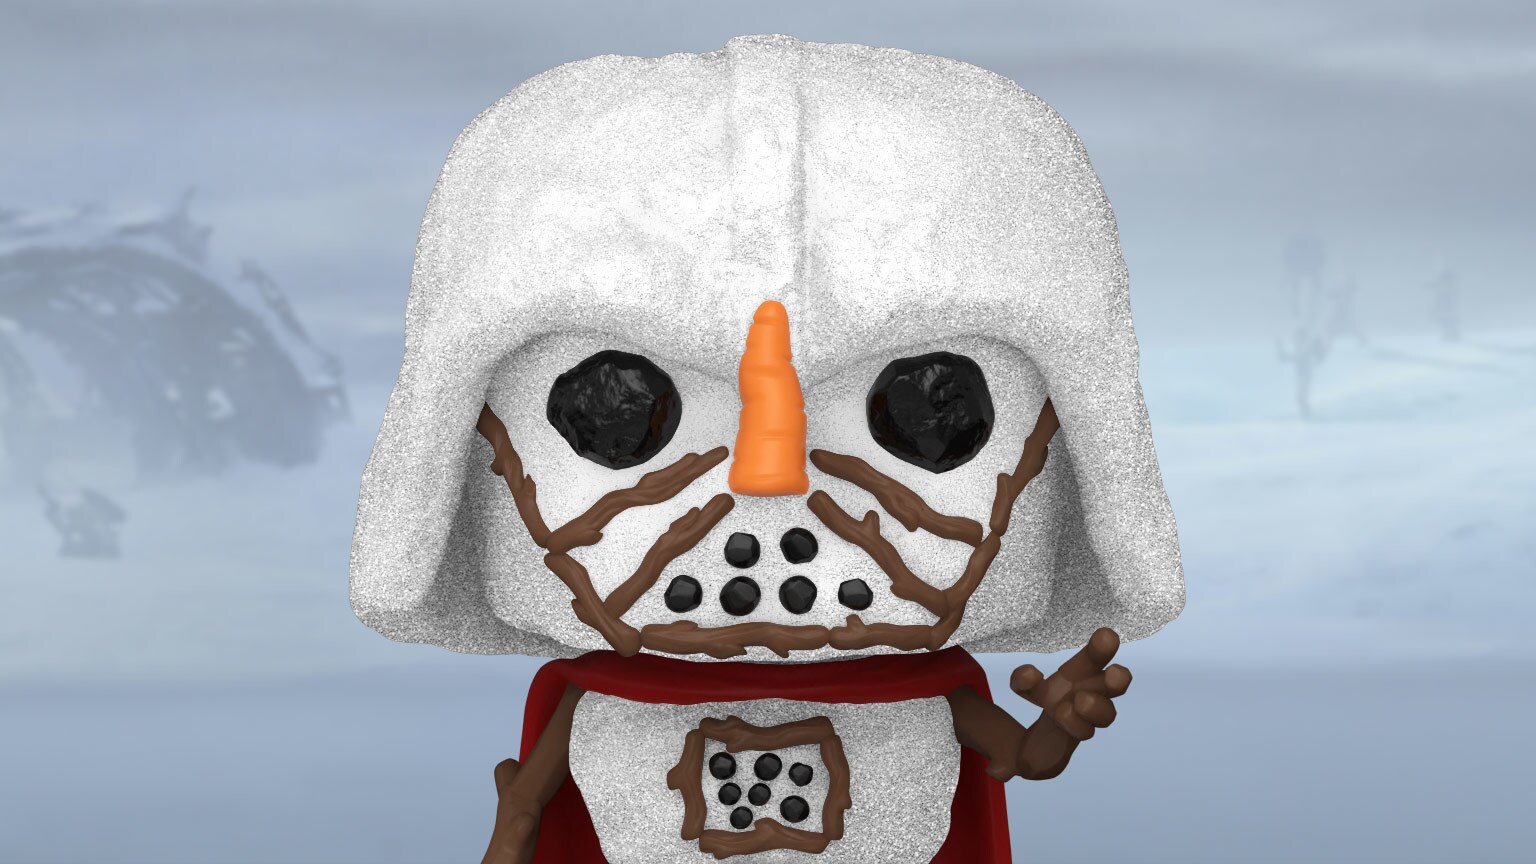 Star Wars Takes a Snow Day at Funko’s Festival of Fun